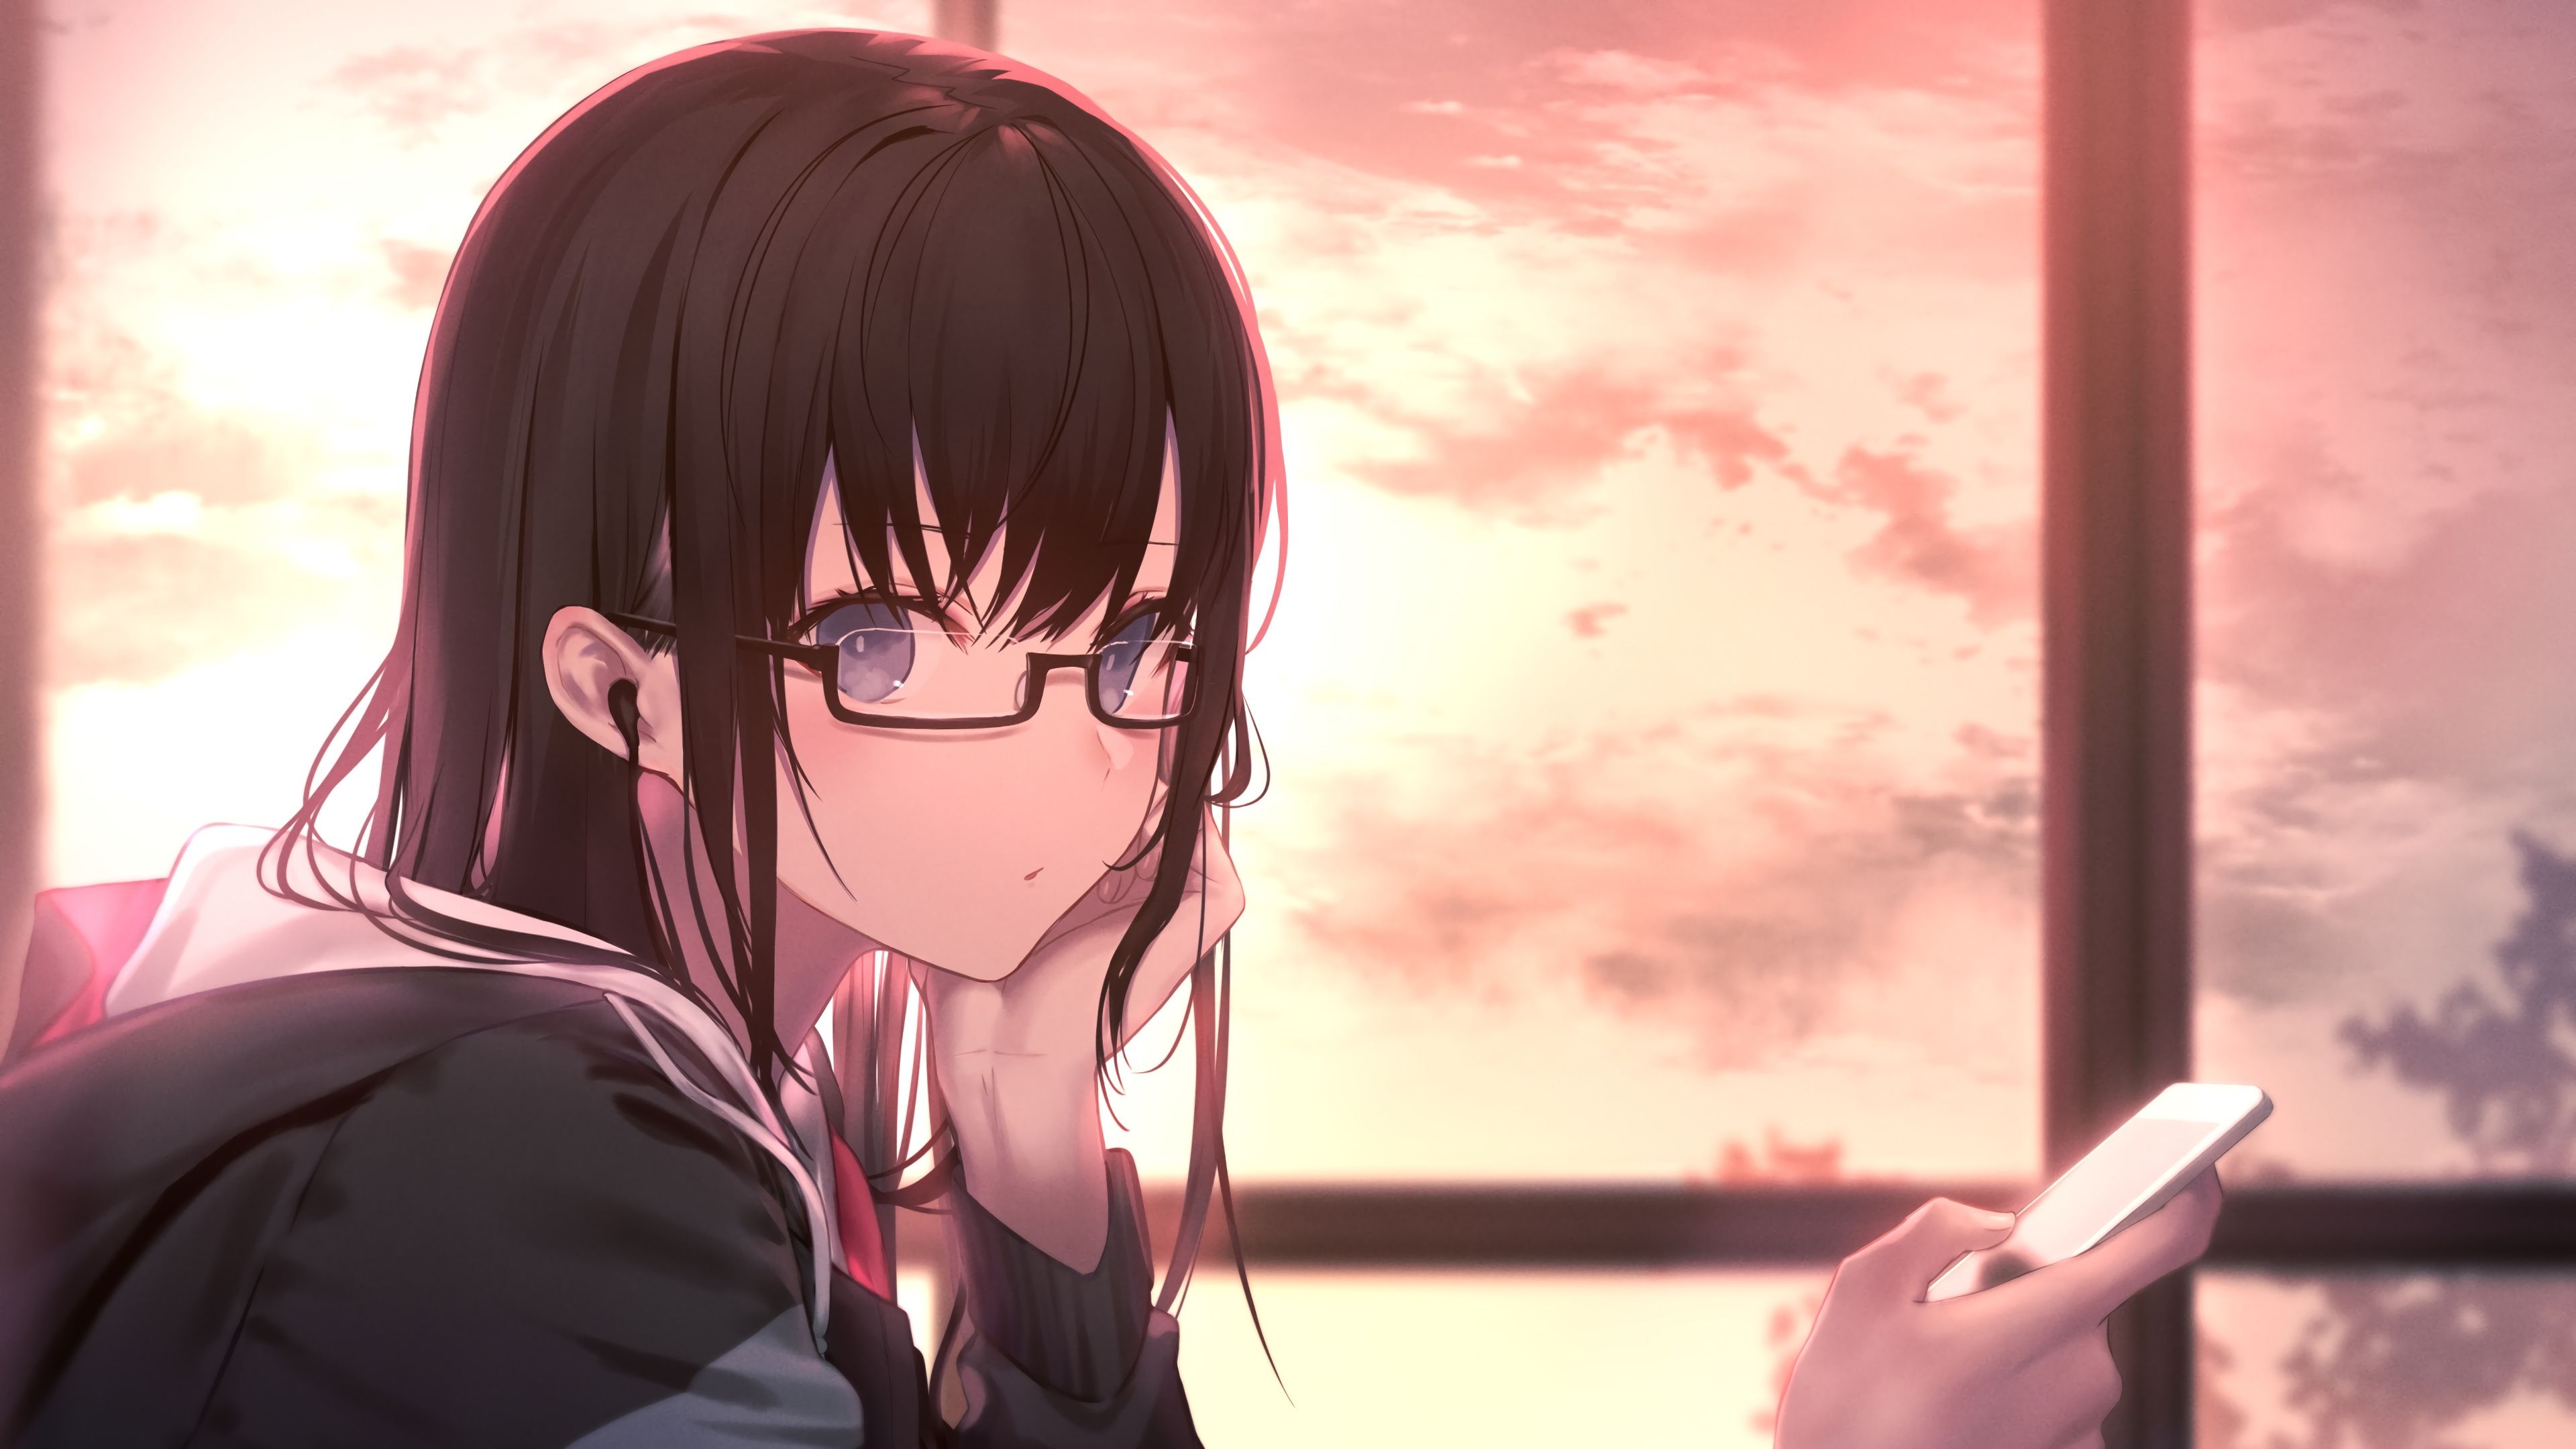 Anime Girl in Glasses with Student Uniform Wallpaper 4k Ultra HD